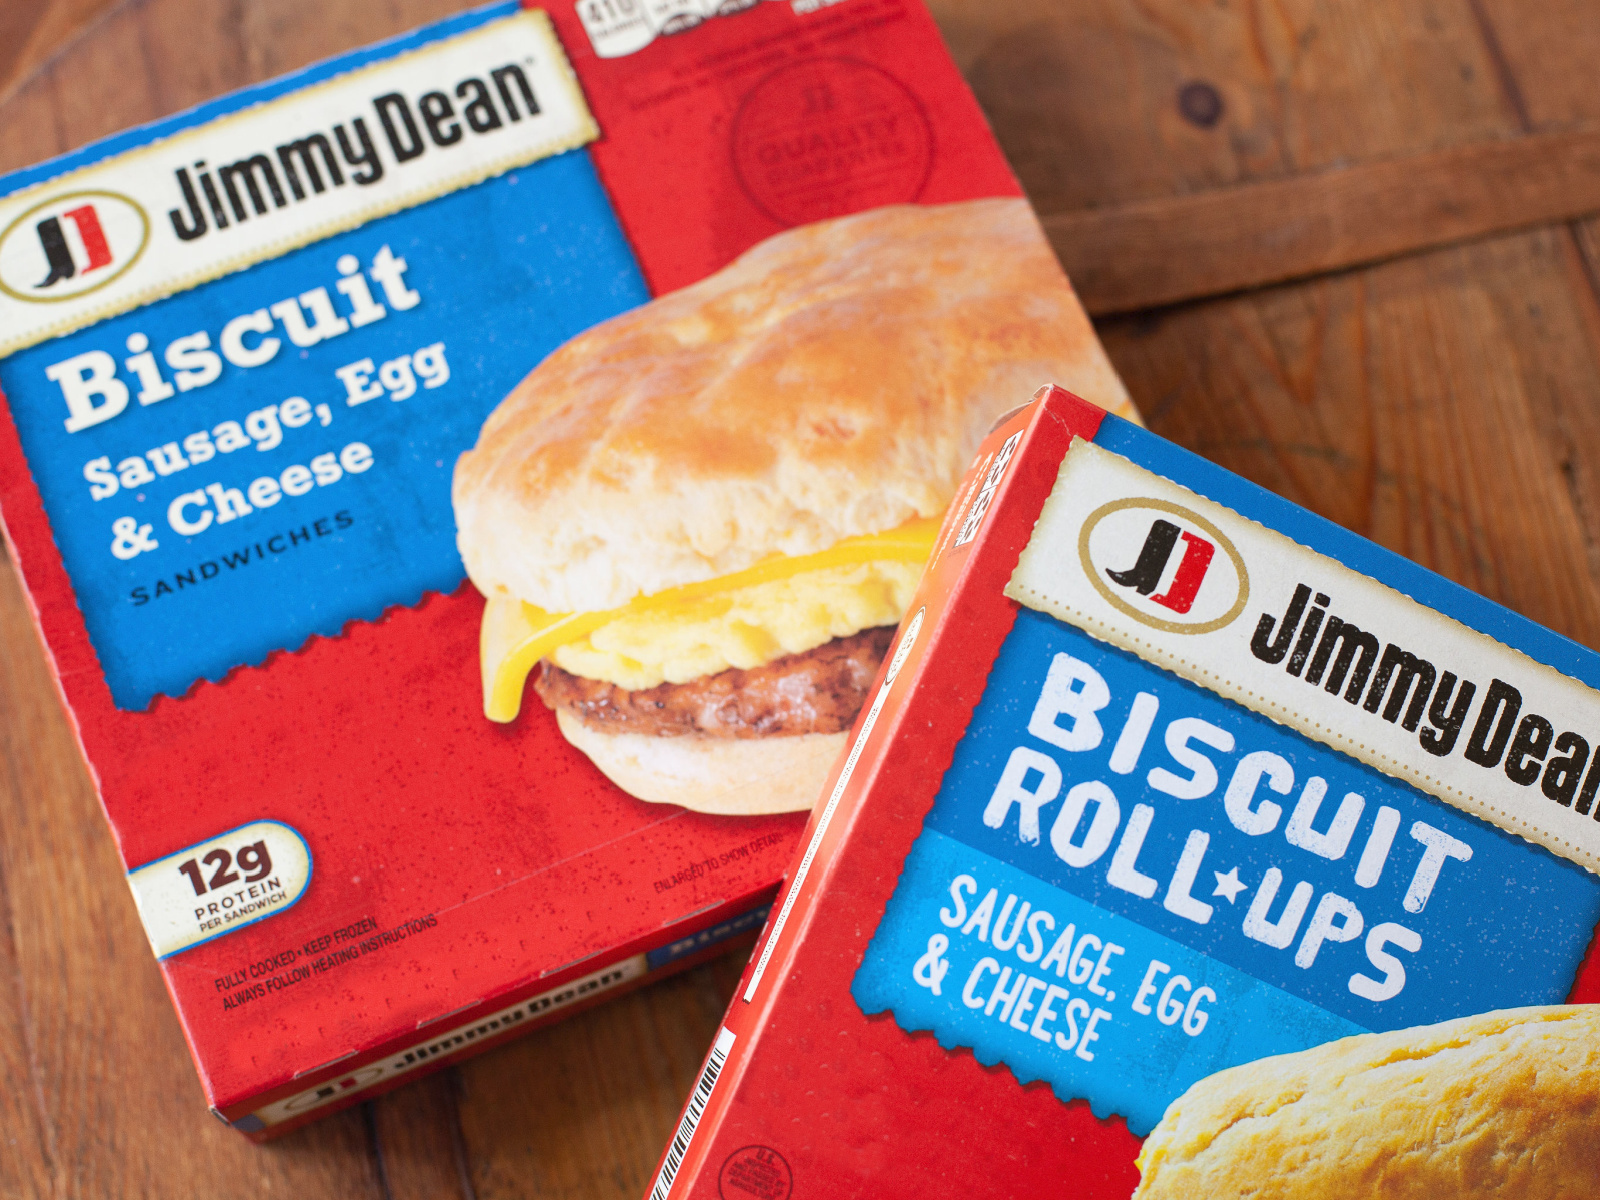 Value Size Boxes Of Jimmy Dean Breakfast Sandwiches Just $8.99 At Kroger